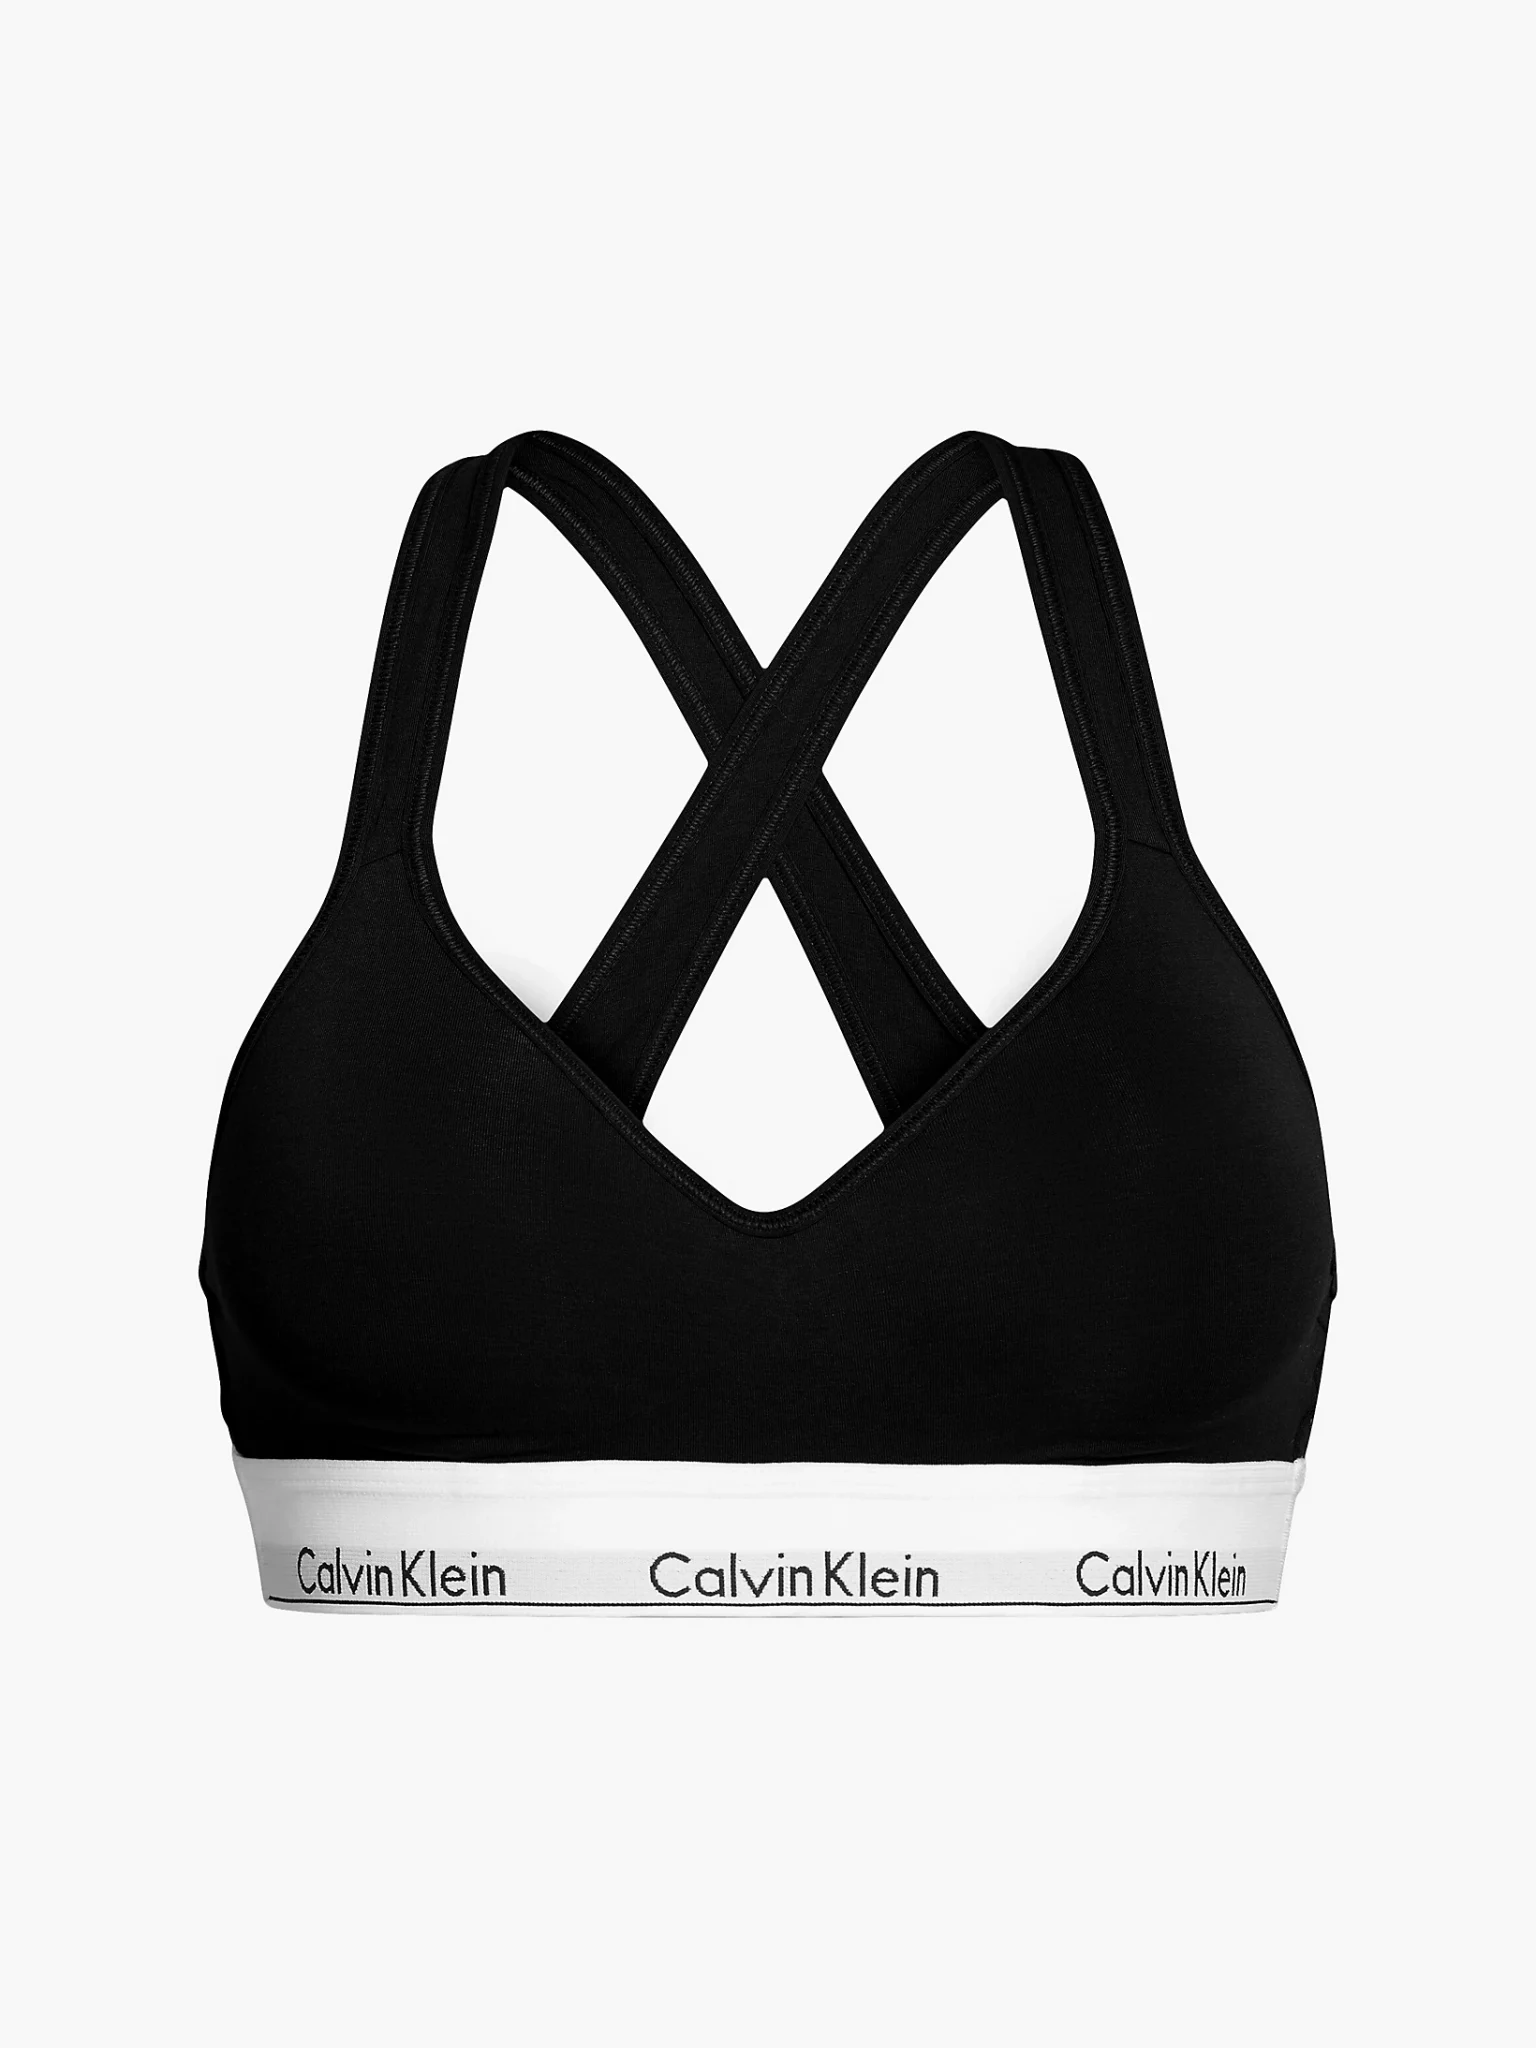 Calvin Klein New Comfort Logo Lightly Lined Bralette  Urban Outfitters  Japan - Clothing, Music, Home & Accessories